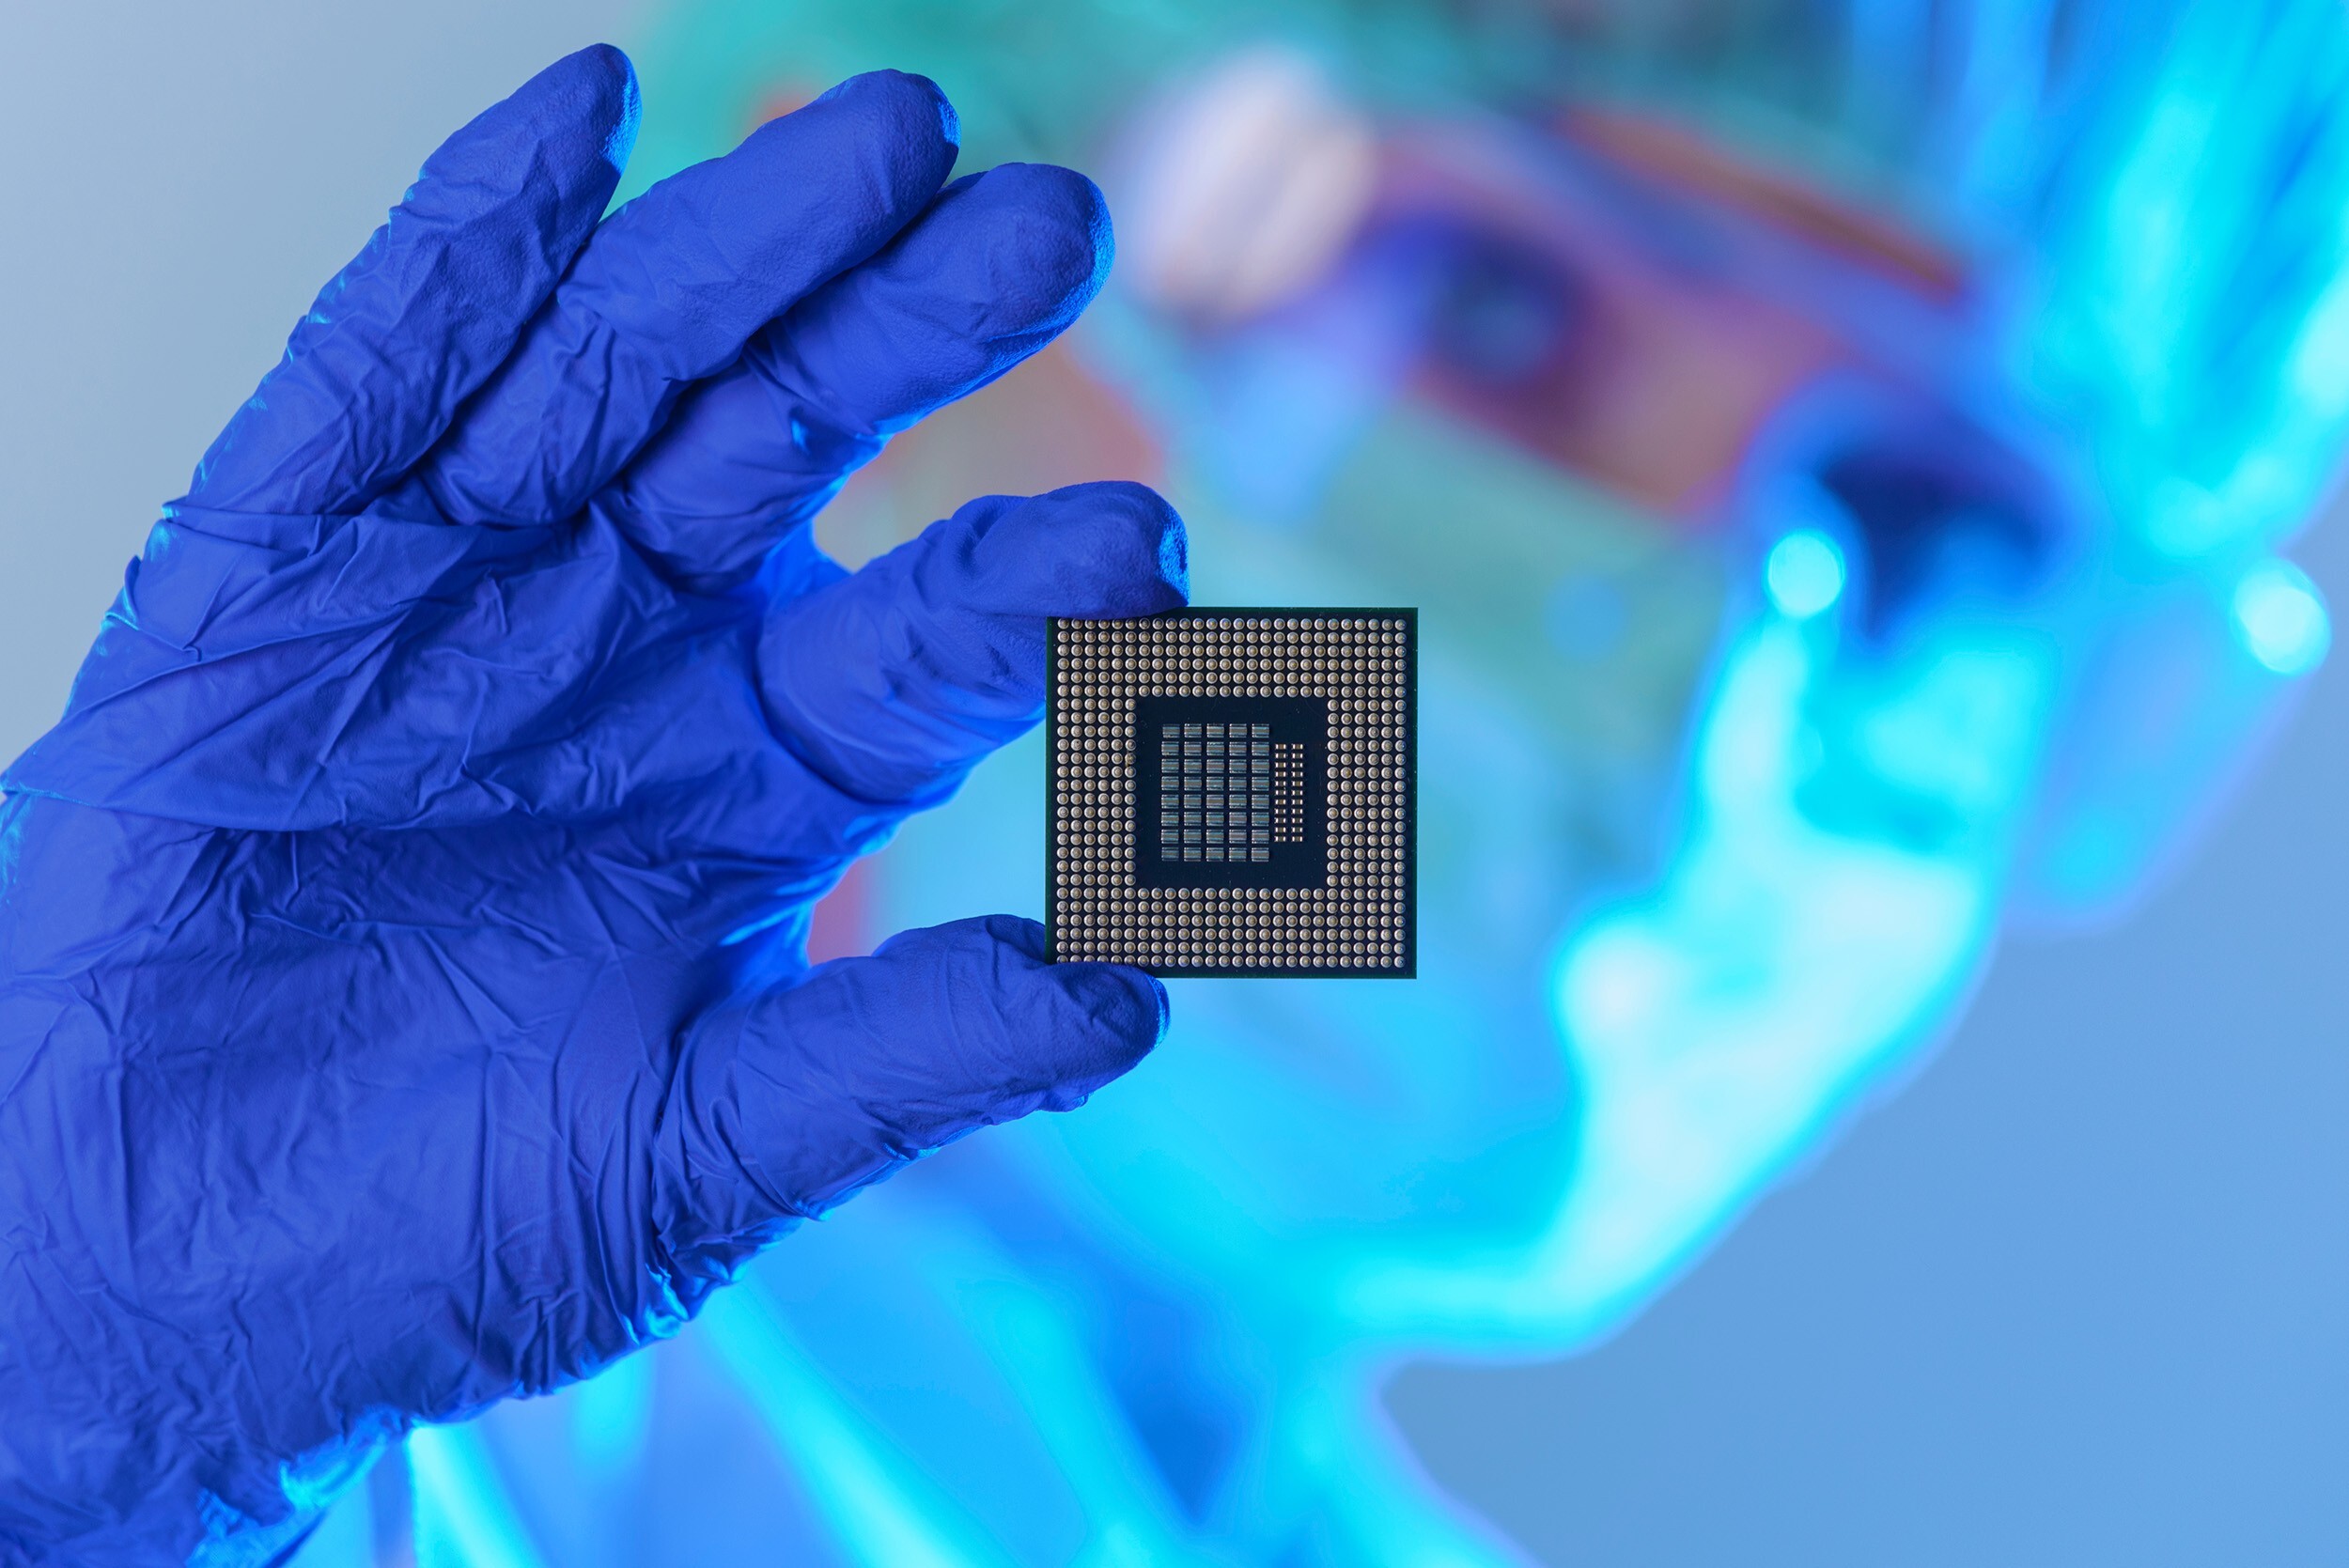 A laboratory engineer inspects a computer chip. Photo: Shutterstock